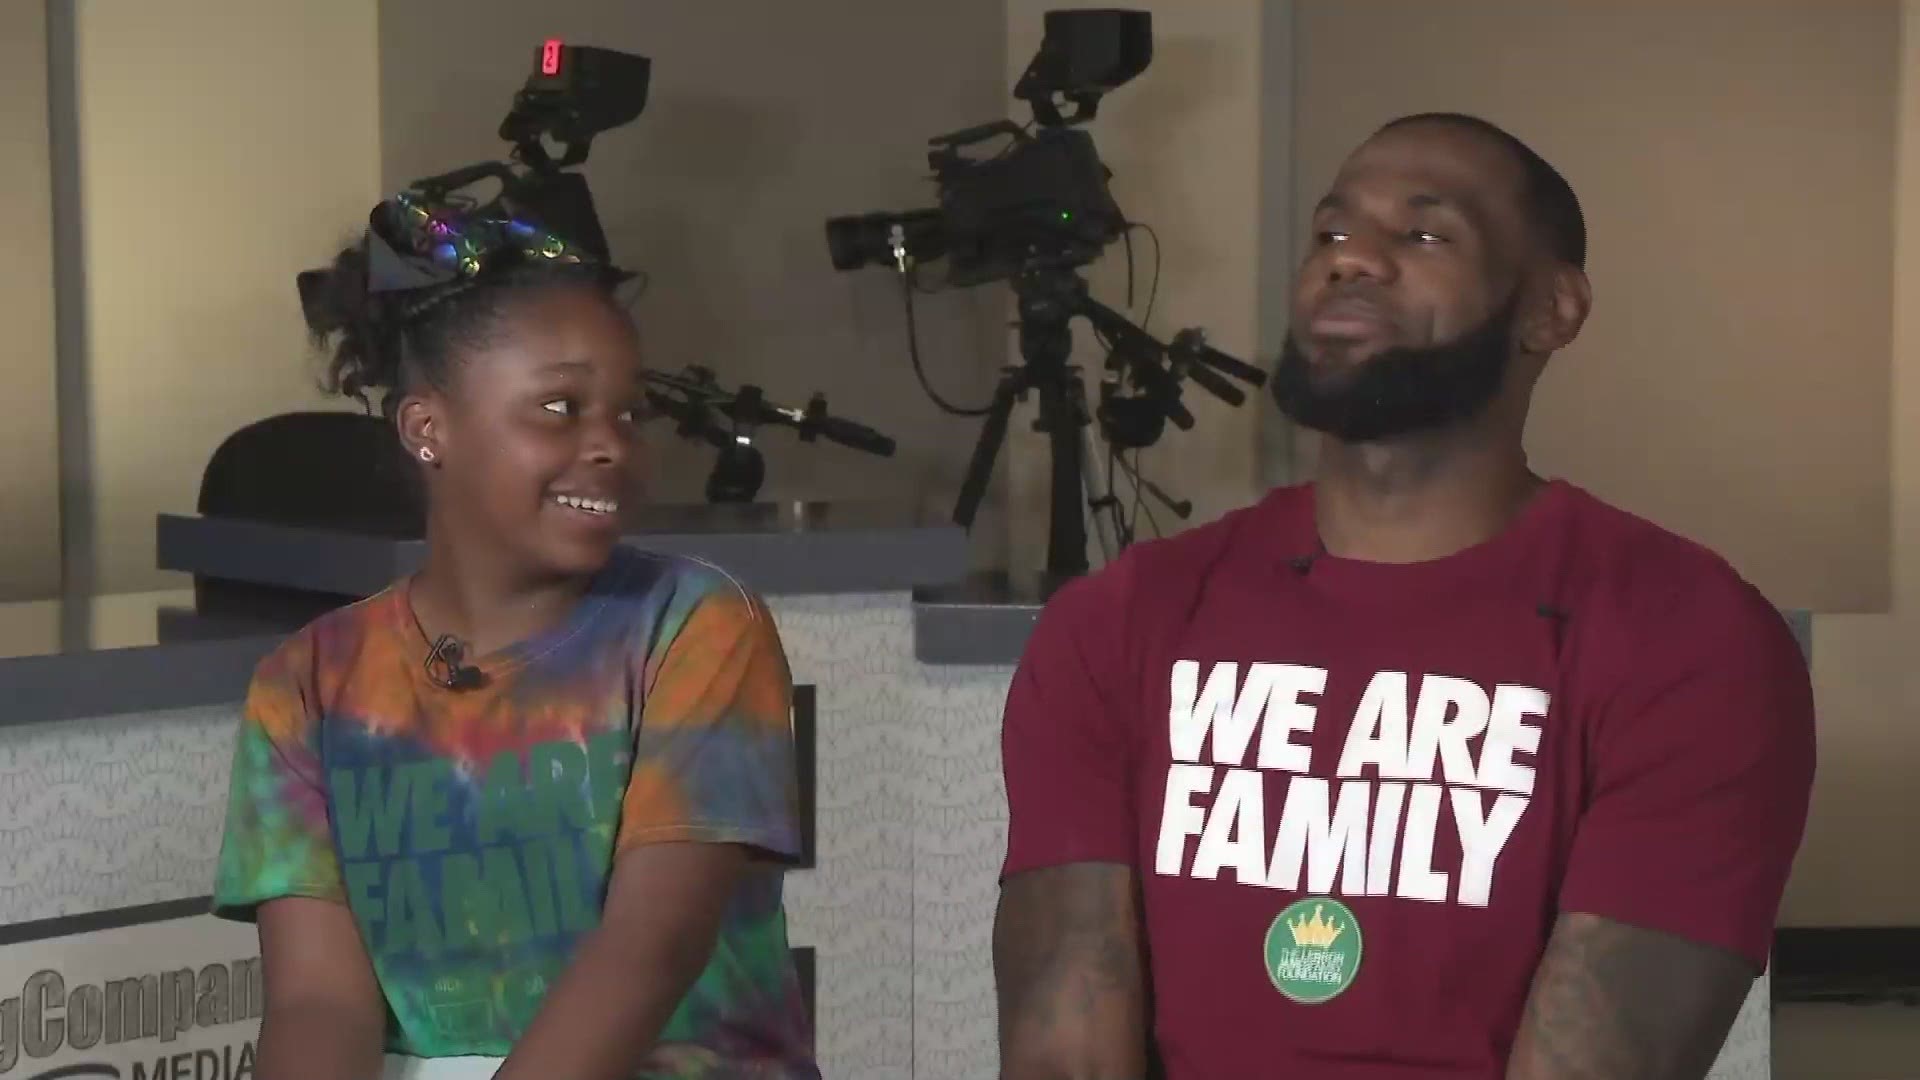 A fifth grader at the I PROMISE School got to ask LeBron three questions. When she got to the one about Swensons, King James let out a hearty chuckle.